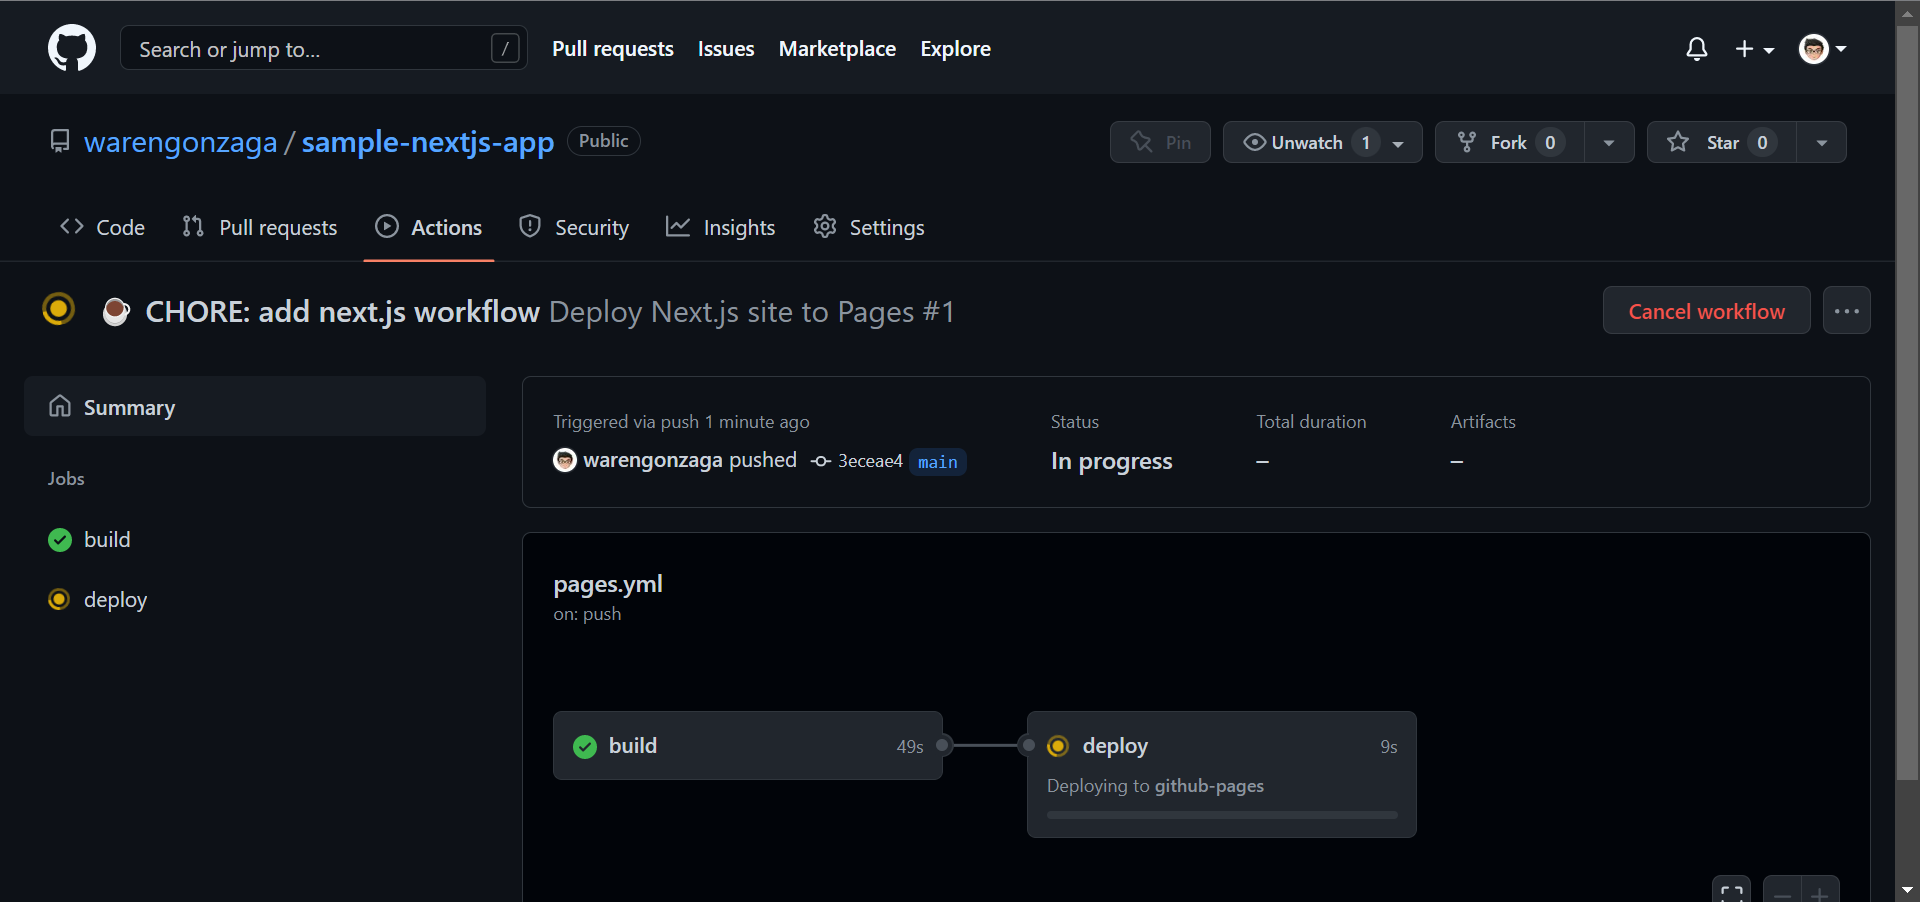 Deploying to GitHub pages